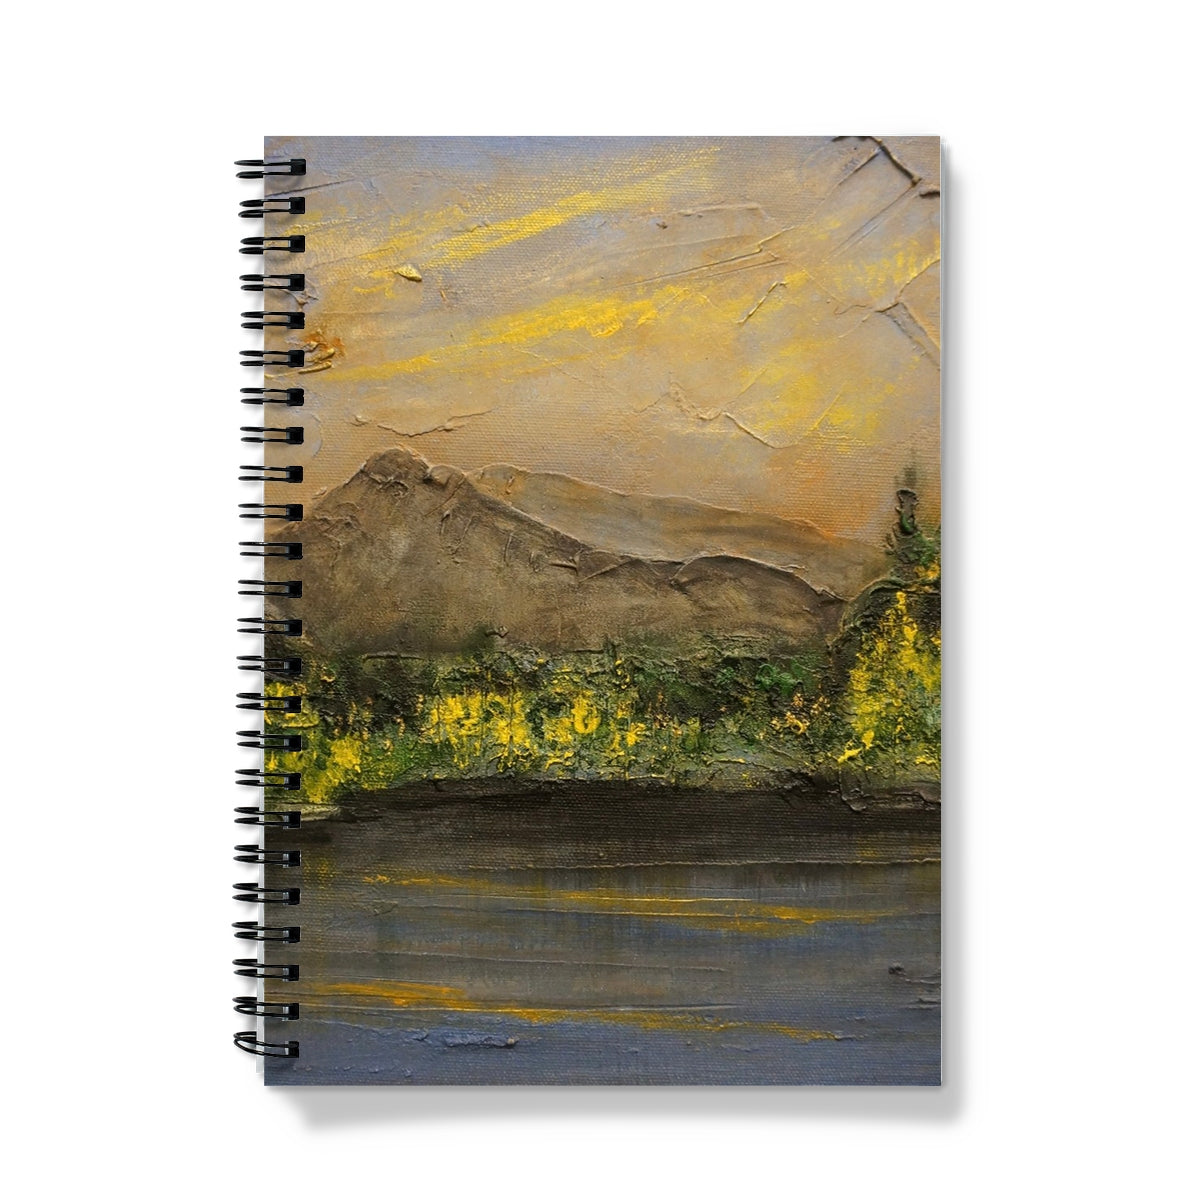 Glencoe Lochan Dusk Art Gifts Notebook-Journals & Notebooks-Scottish Lochs & Mountains Art Gallery-A4-Lined-Paintings, Prints, Homeware, Art Gifts From Scotland By Scottish Artist Kevin Hunter